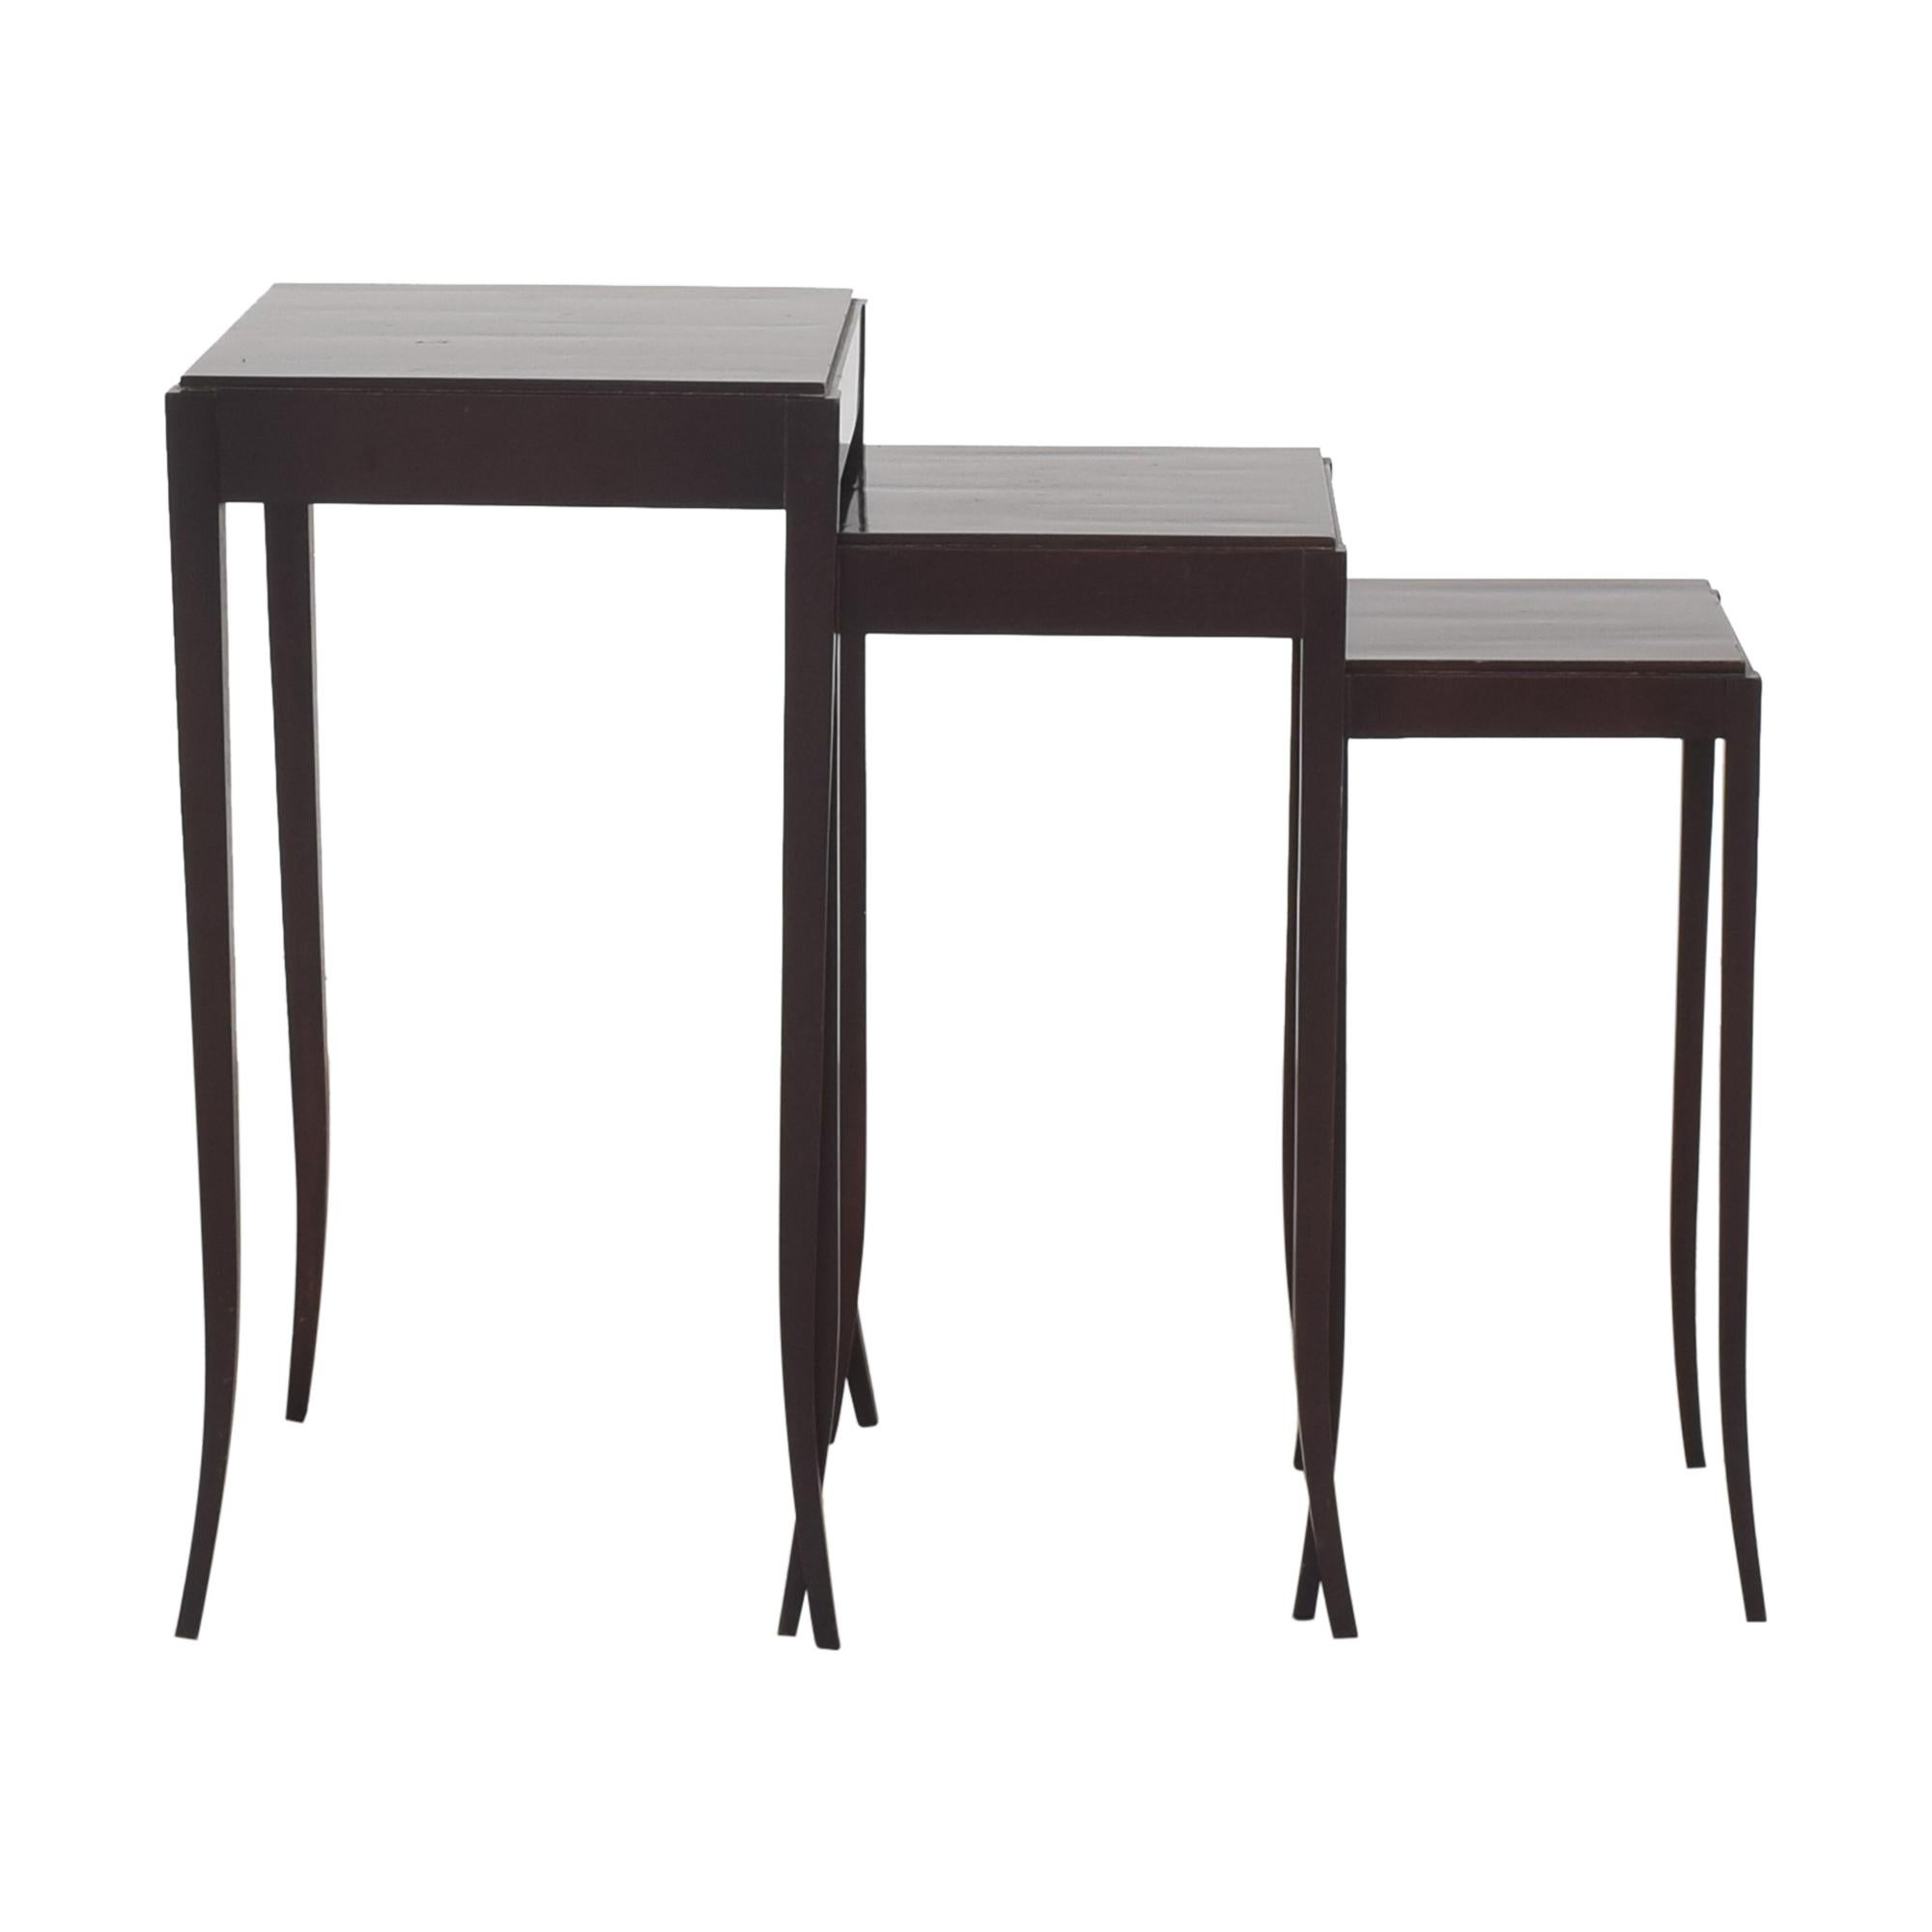 Crafted in hand-planed mahogany, these charming high-heeled tables are a delicate, but chic work of art. Lovely sinuous lines. Custom original finish. This listing is for one set of three nesting tables, as pictured. 

Dimensions:
H-29